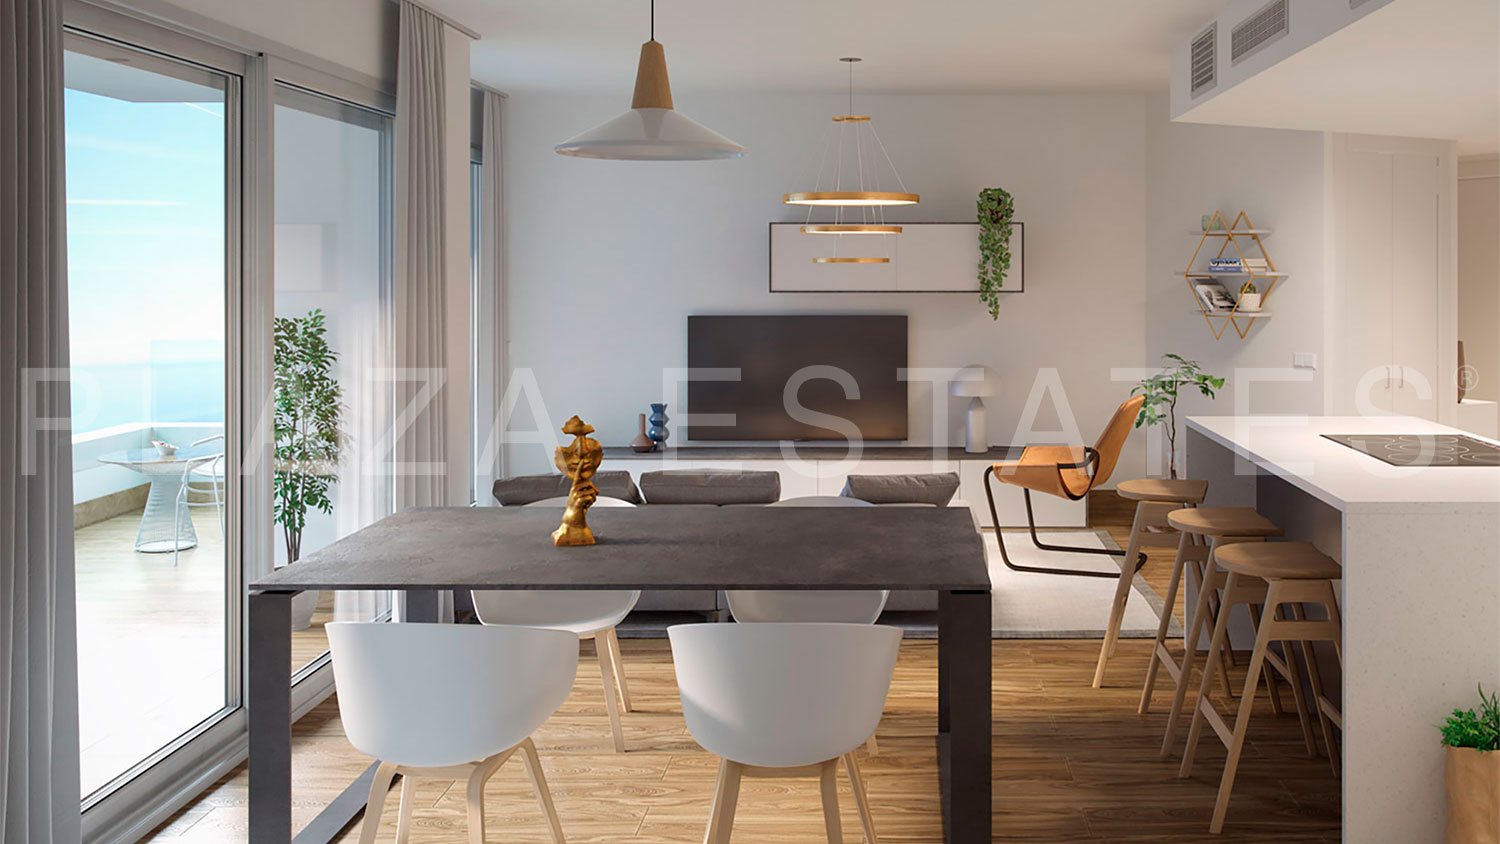 Isea Calaceite apartments for sale